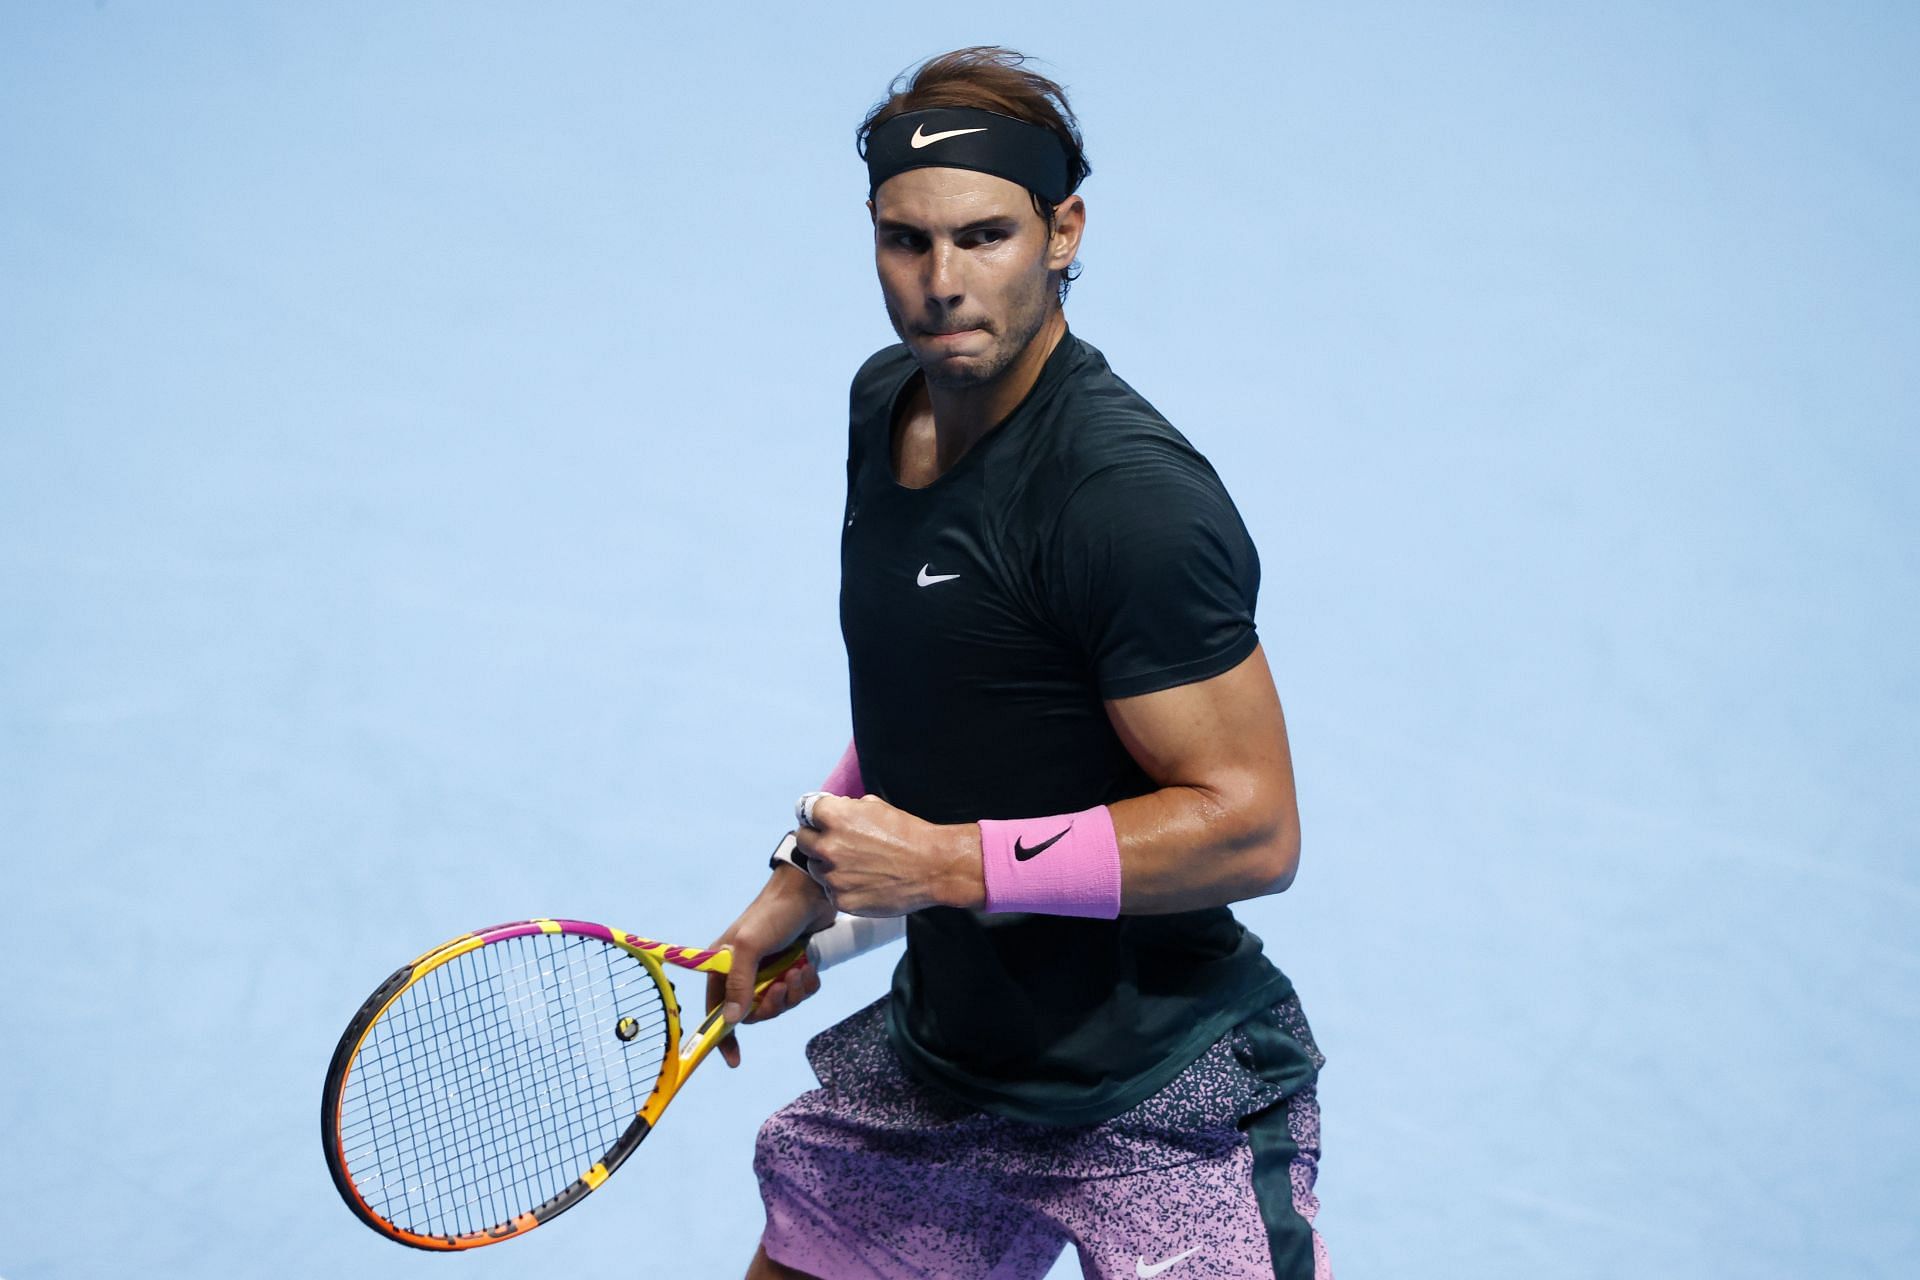 Rafael Nadal remains No. 1 in the ATP Race to Turin